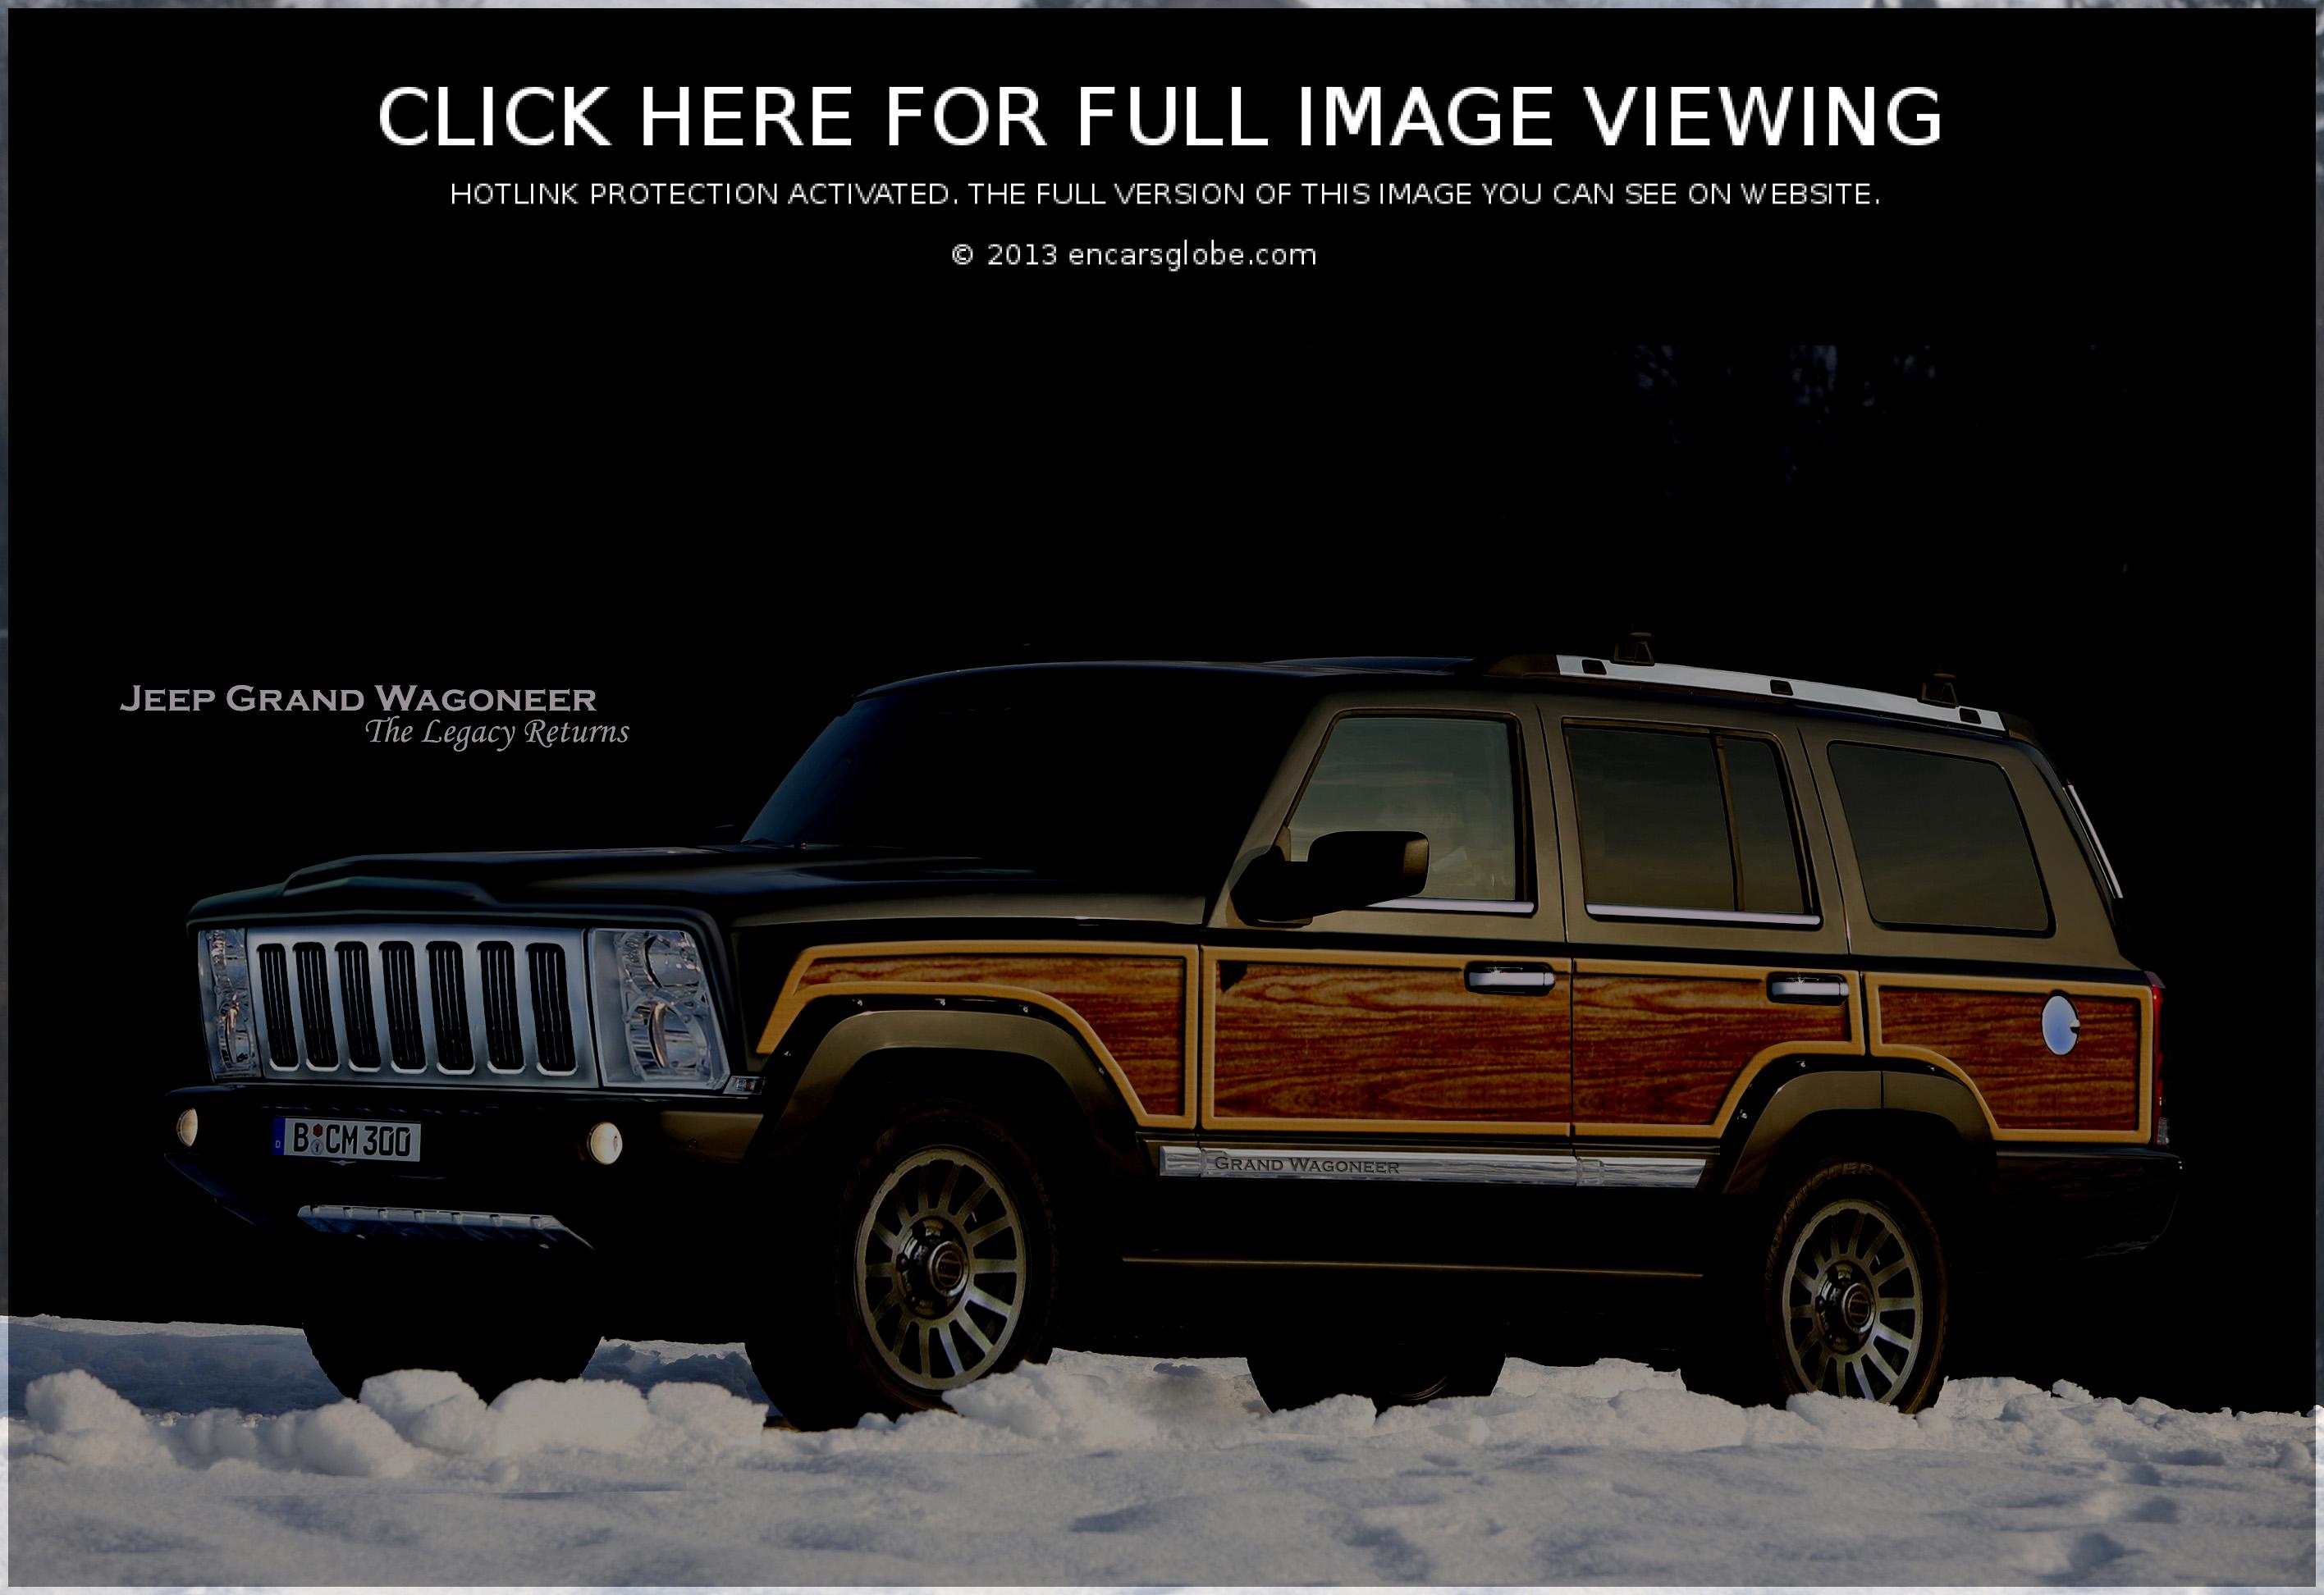 Jeep Grand Wagoneer 4x4 Photo Gallery: Photo #06 out of 10, Image ...